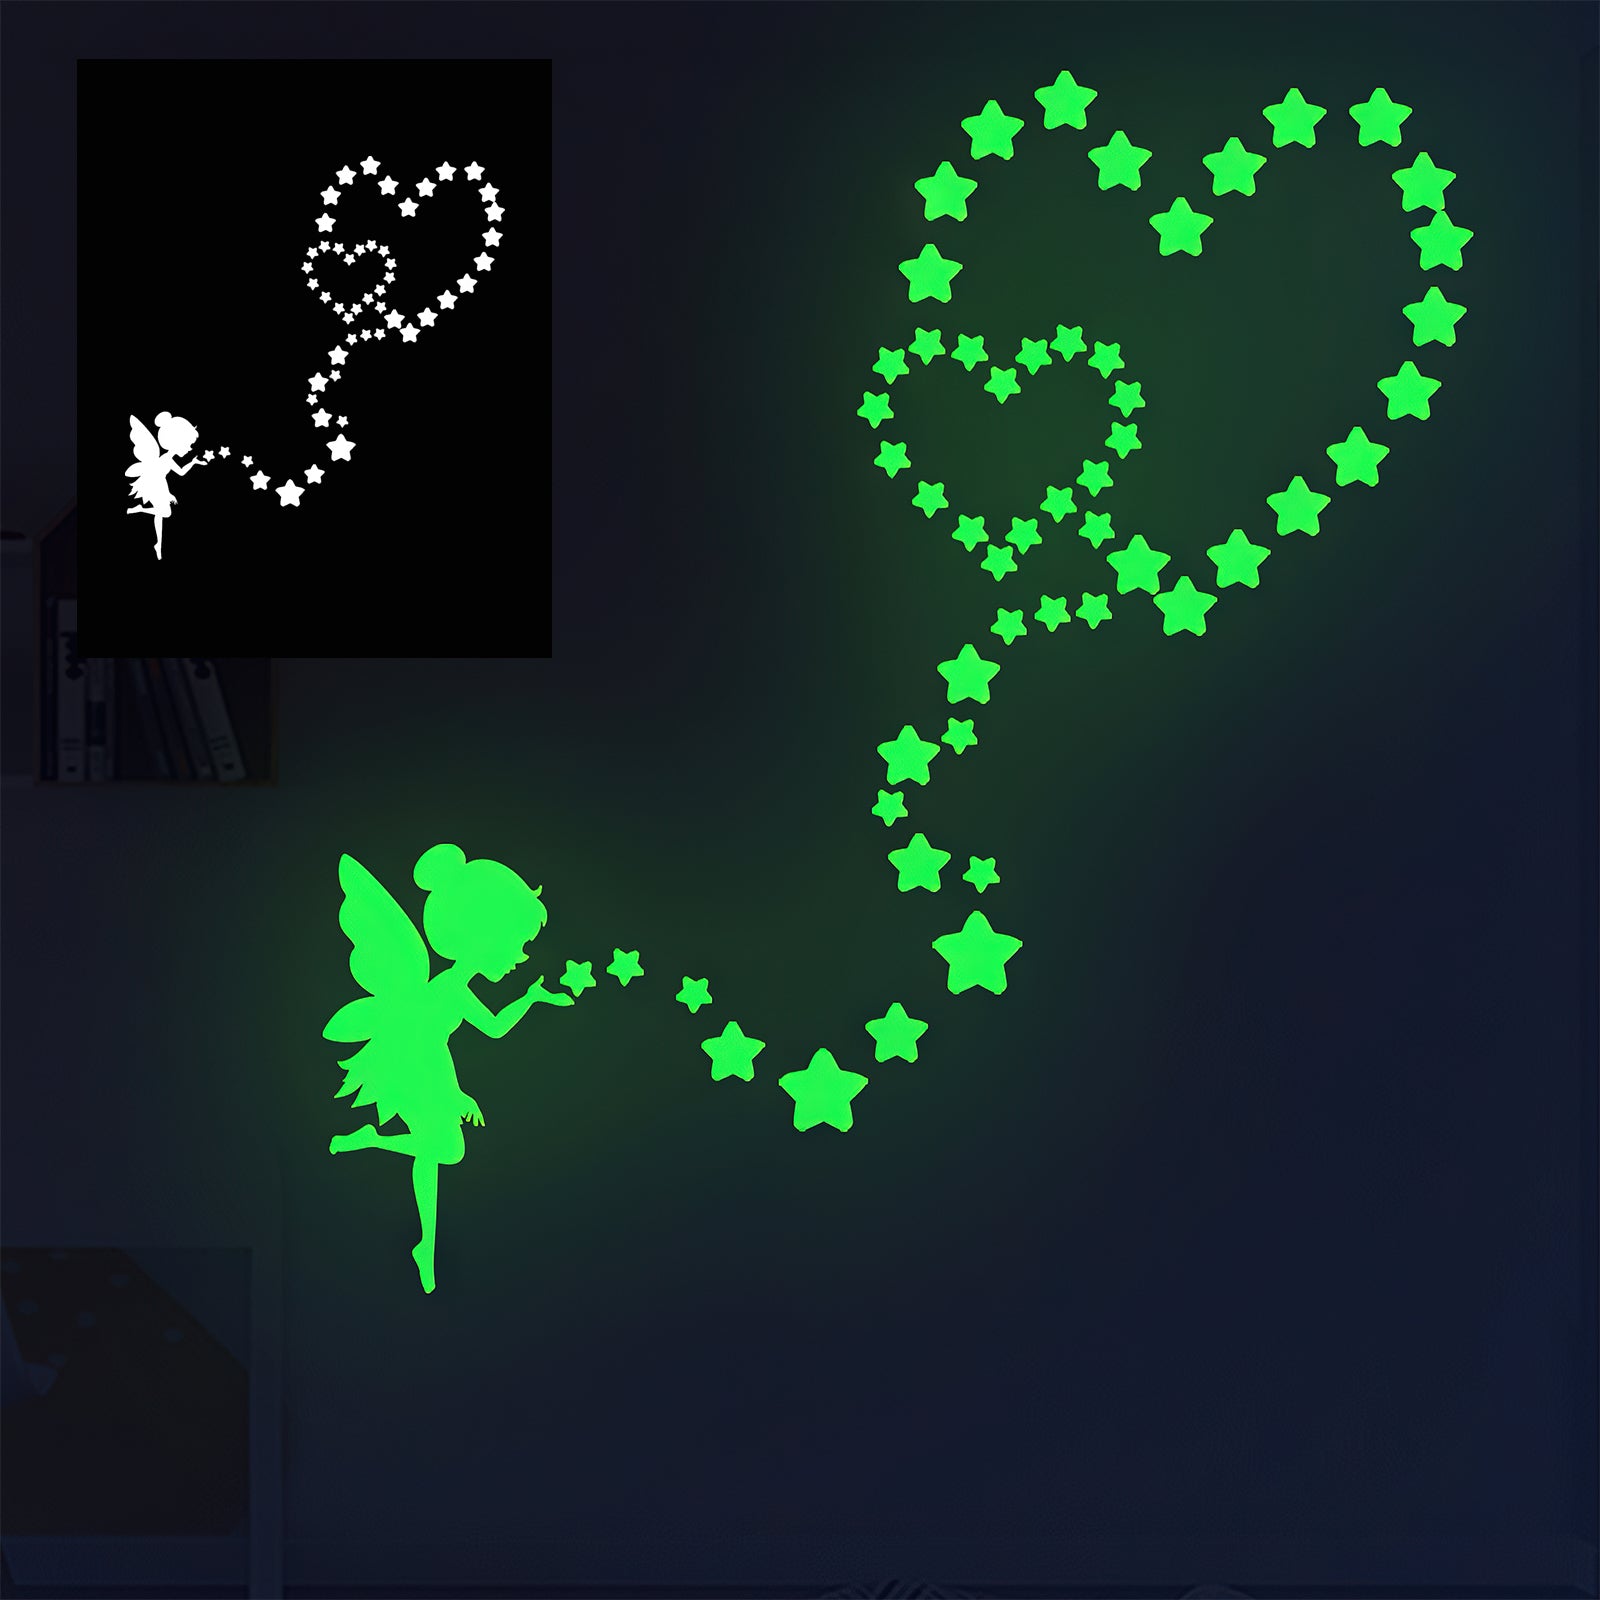 Glow-in-the-dark wall stickers featuring a silhouette of a fairy blowing a trail of glowing stars that form two connected hearts. The scene creates a magical and whimsical atmosphere against a dark background, reminiscent of designs crafted with precise laser technology, such as the 50pcs A4 Luminous Scratch Paper Fluorescent Scratch for Falcon Laser Engraving from CrealityFalcon. An inset shows the stickers' appearance in light.